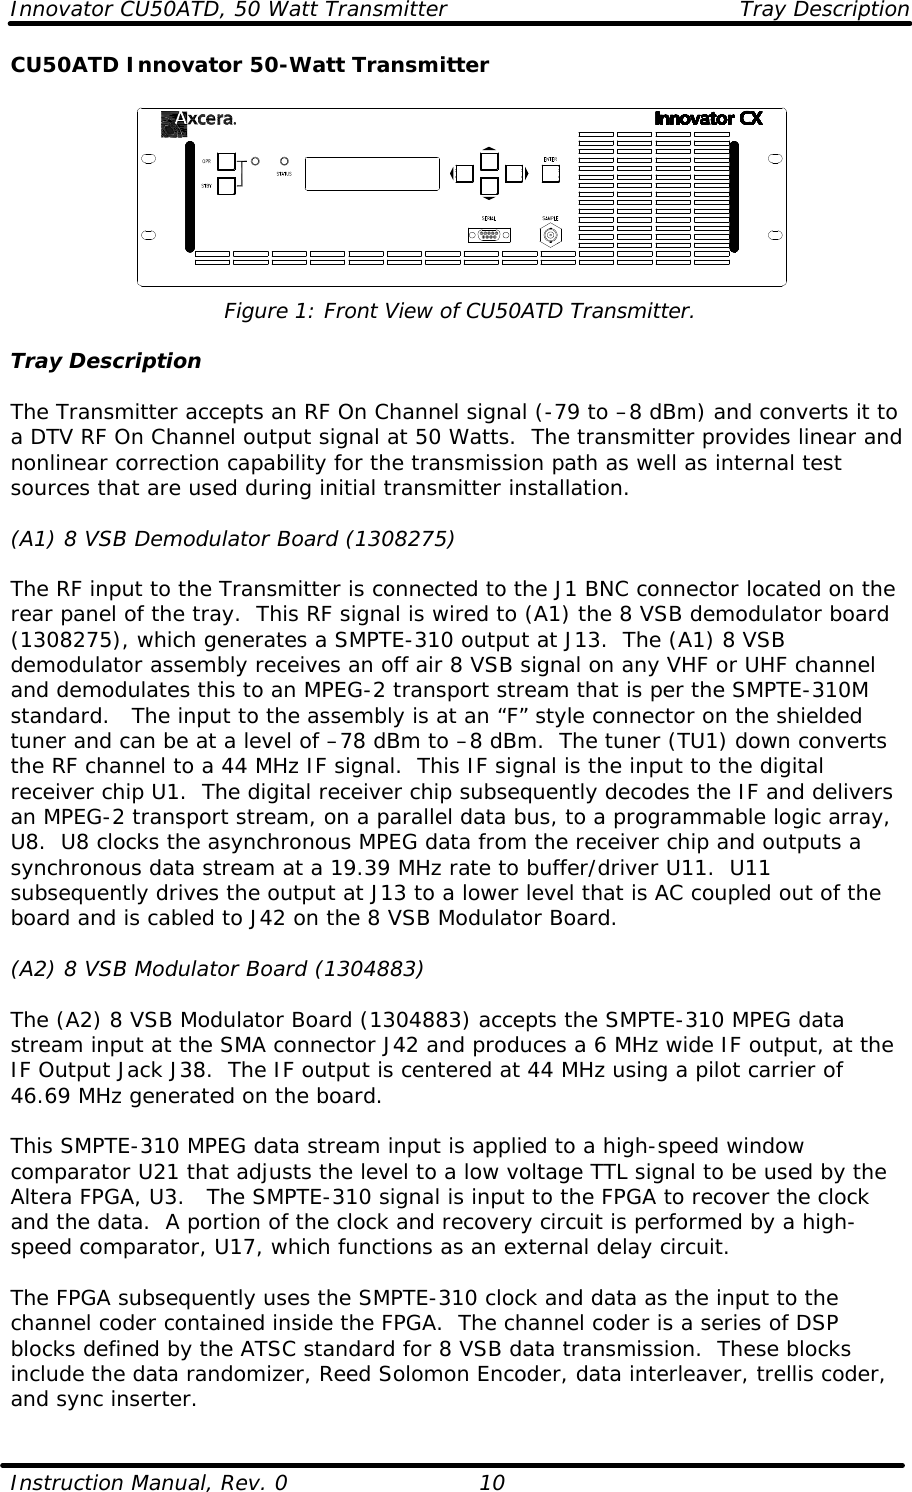 Innovator CU50ATD, 50 Watt Transmitter Tray Description  Instruction Manual, Rev. 0    10 CU50ATD Innovator 50-Watt Transmitter   Figure 1: Front View of CU50ATD Transmitter.  Tray Description  The Transmitter accepts an RF On Channel signal (-79 to –8 dBm) and converts it to a DTV RF On Channel output signal at 50 Watts.  The transmitter provides linear and nonlinear correction capability for the transmission path as well as internal test sources that are used during initial transmitter installation.  (A1) 8 VSB Demodulator Board (1308275)  The RF input to the Transmitter is connected to the J1 BNC connector located on the rear panel of the tray.  This RF signal is wired to (A1) the 8 VSB demodulator board (1308275), which generates a SMPTE-310 output at J13.  The (A1) 8 VSB demodulator assembly receives an off air 8 VSB signal on any VHF or UHF channel and demodulates this to an MPEG-2 transport stream that is per the SMPTE-310M standard.   The input to the assembly is at an “F” style connector on the shielded tuner and can be at a level of –78 dBm to –8 dBm.  The tuner (TU1) down converts the RF channel to a 44 MHz IF signal.  This IF signal is the input to the digital receiver chip U1.  The digital receiver chip subsequently decodes the IF and delivers an MPEG-2 transport stream, on a parallel data bus, to a programmable logic array, U8.  U8 clocks the asynchronous MPEG data from the receiver chip and outputs a synchronous data stream at a 19.39 MHz rate to buffer/driver U11.  U11 subsequently drives the output at J13 to a lower level that is AC coupled out of the board and is cabled to J42 on the 8 VSB Modulator Board.  (A2) 8 VSB Modulator Board (1304883)  The (A2) 8 VSB Modulator Board (1304883) accepts the SMPTE-310 MPEG data stream input at the SMA connector J42 and produces a 6 MHz wide IF output, at the IF Output Jack J38.  The IF output is centered at 44 MHz using a pilot carrier of 46.69 MHz generated on the board.    This SMPTE-310 MPEG data stream input is applied to a high-speed window comparator U21 that adjusts the level to a low voltage TTL signal to be used by the Altera FPGA, U3.   The SMPTE-310 signal is input to the FPGA to recover the clock and the data.  A portion of the clock and recovery circuit is performed by a high-speed comparator, U17, which functions as an external delay circuit.    The FPGA subsequently uses the SMPTE-310 clock and data as the input to the channel coder contained inside the FPGA.  The channel coder is a series of DSP blocks defined by the ATSC standard for 8 VSB data transmission.  These blocks include the data randomizer, Reed Solomon Encoder, data interleaver, trellis coder, and sync inserter. 